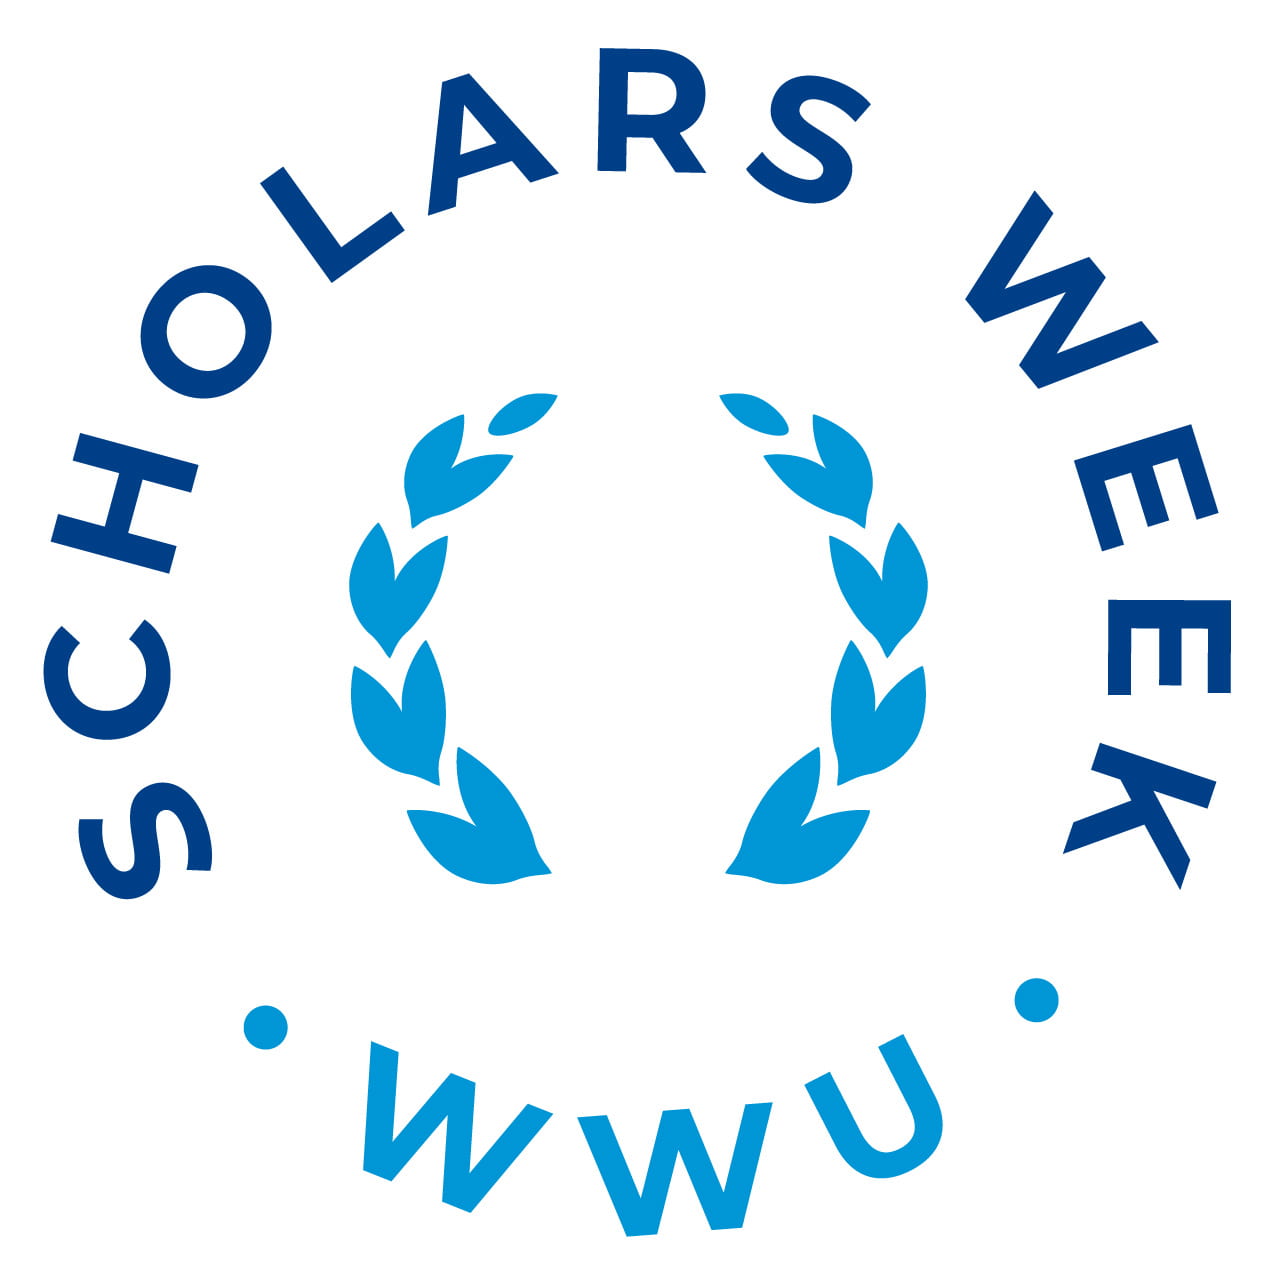 Logo: Scholars Week WWU text circling the perimeter with circle of laurel leaves at center. 